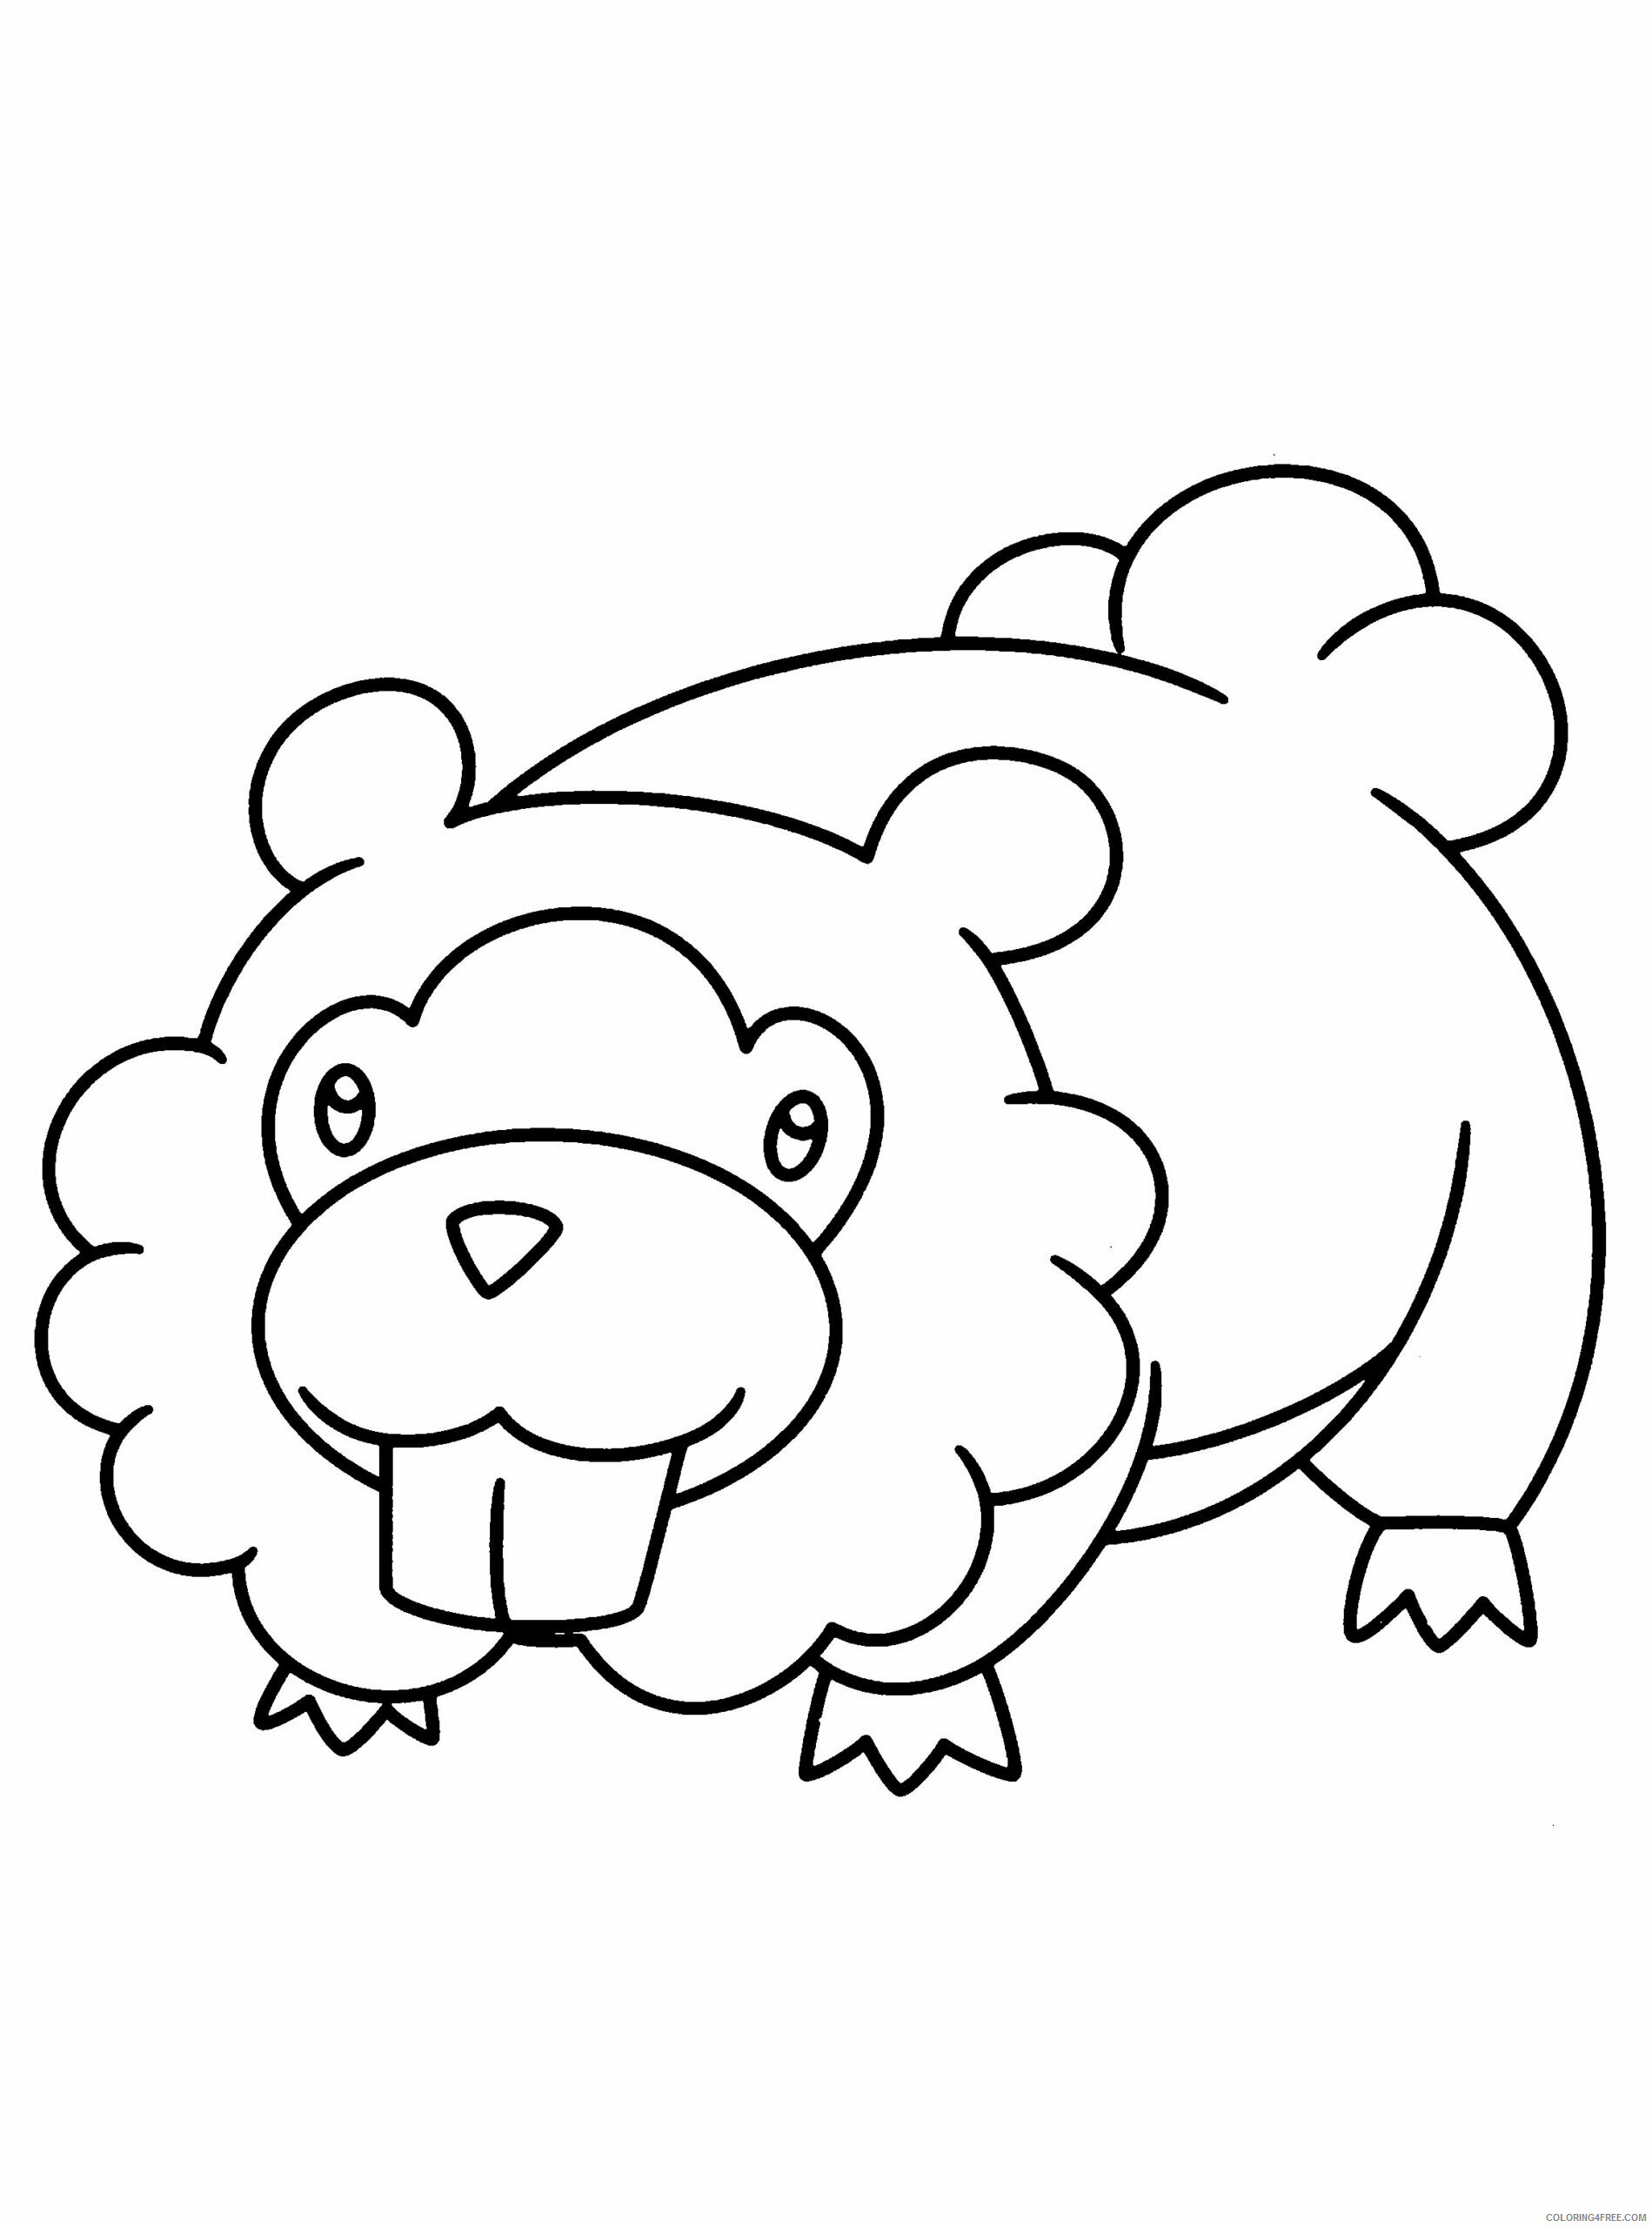 Pokemon Diamond Pearl Coloring Pages Anime pokemon diamond pearl 328 Printable 2021 826 Coloring4free